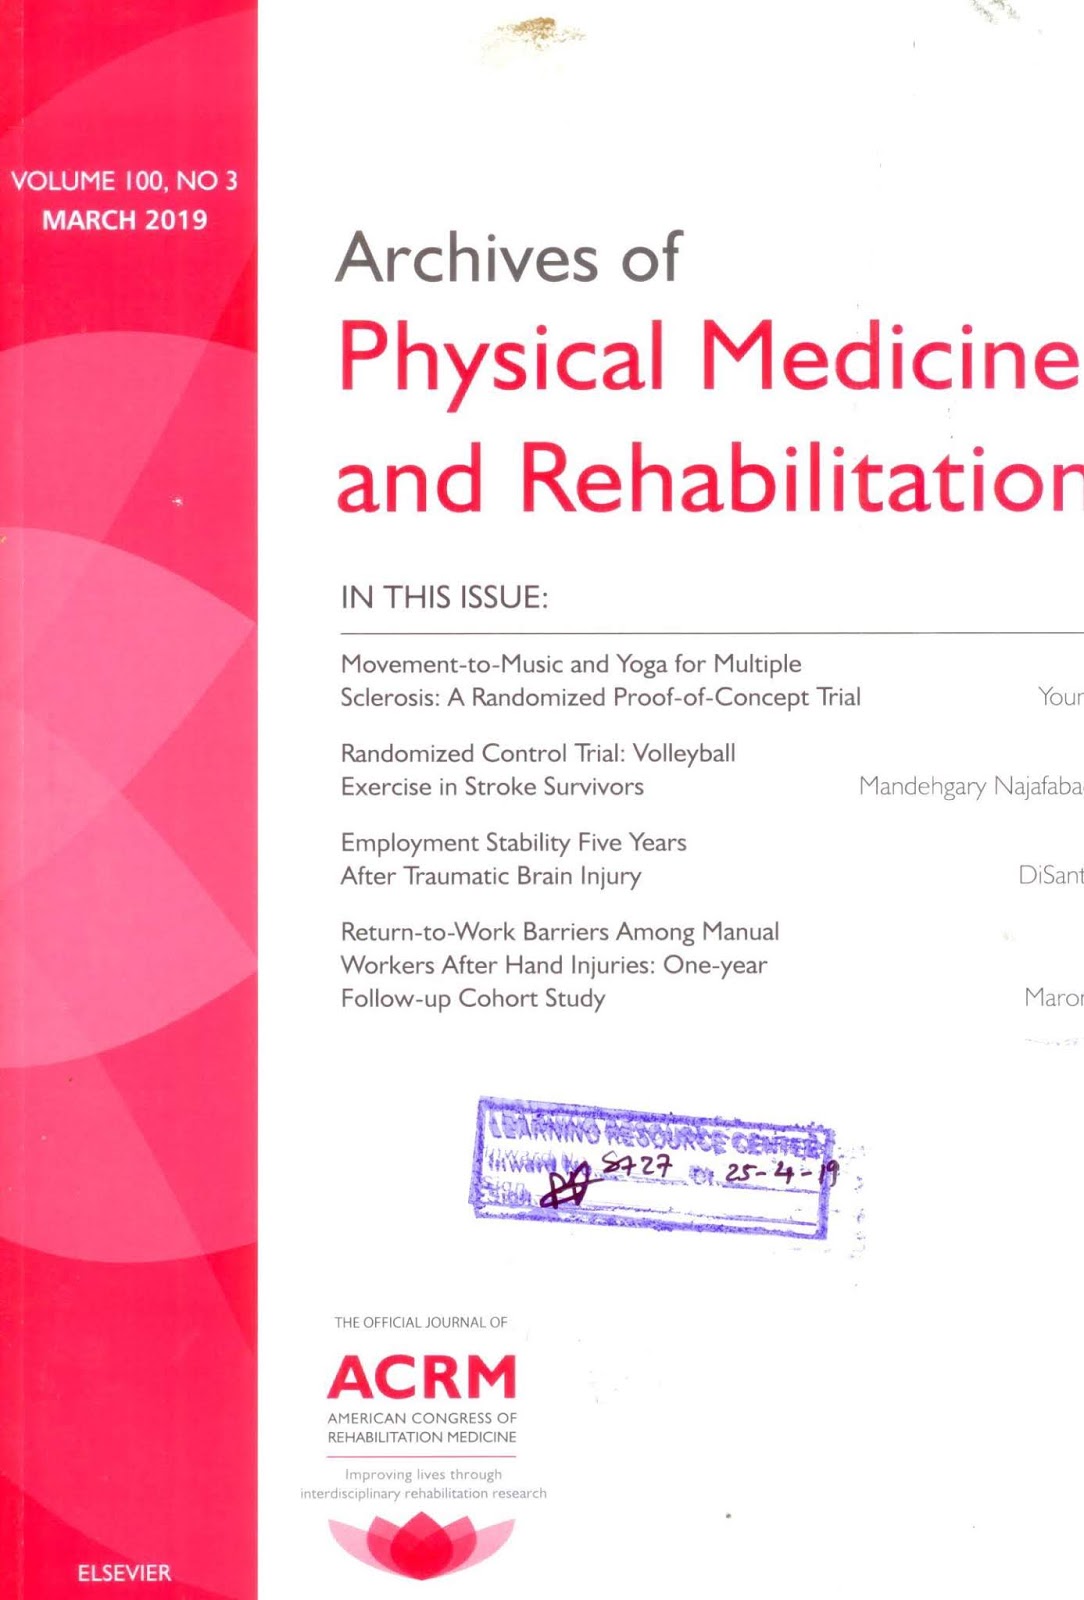 https://www.sciencedirect.com/journal/archives-of-physical-medicine-and-rehabilitation/vol/100/issue/3